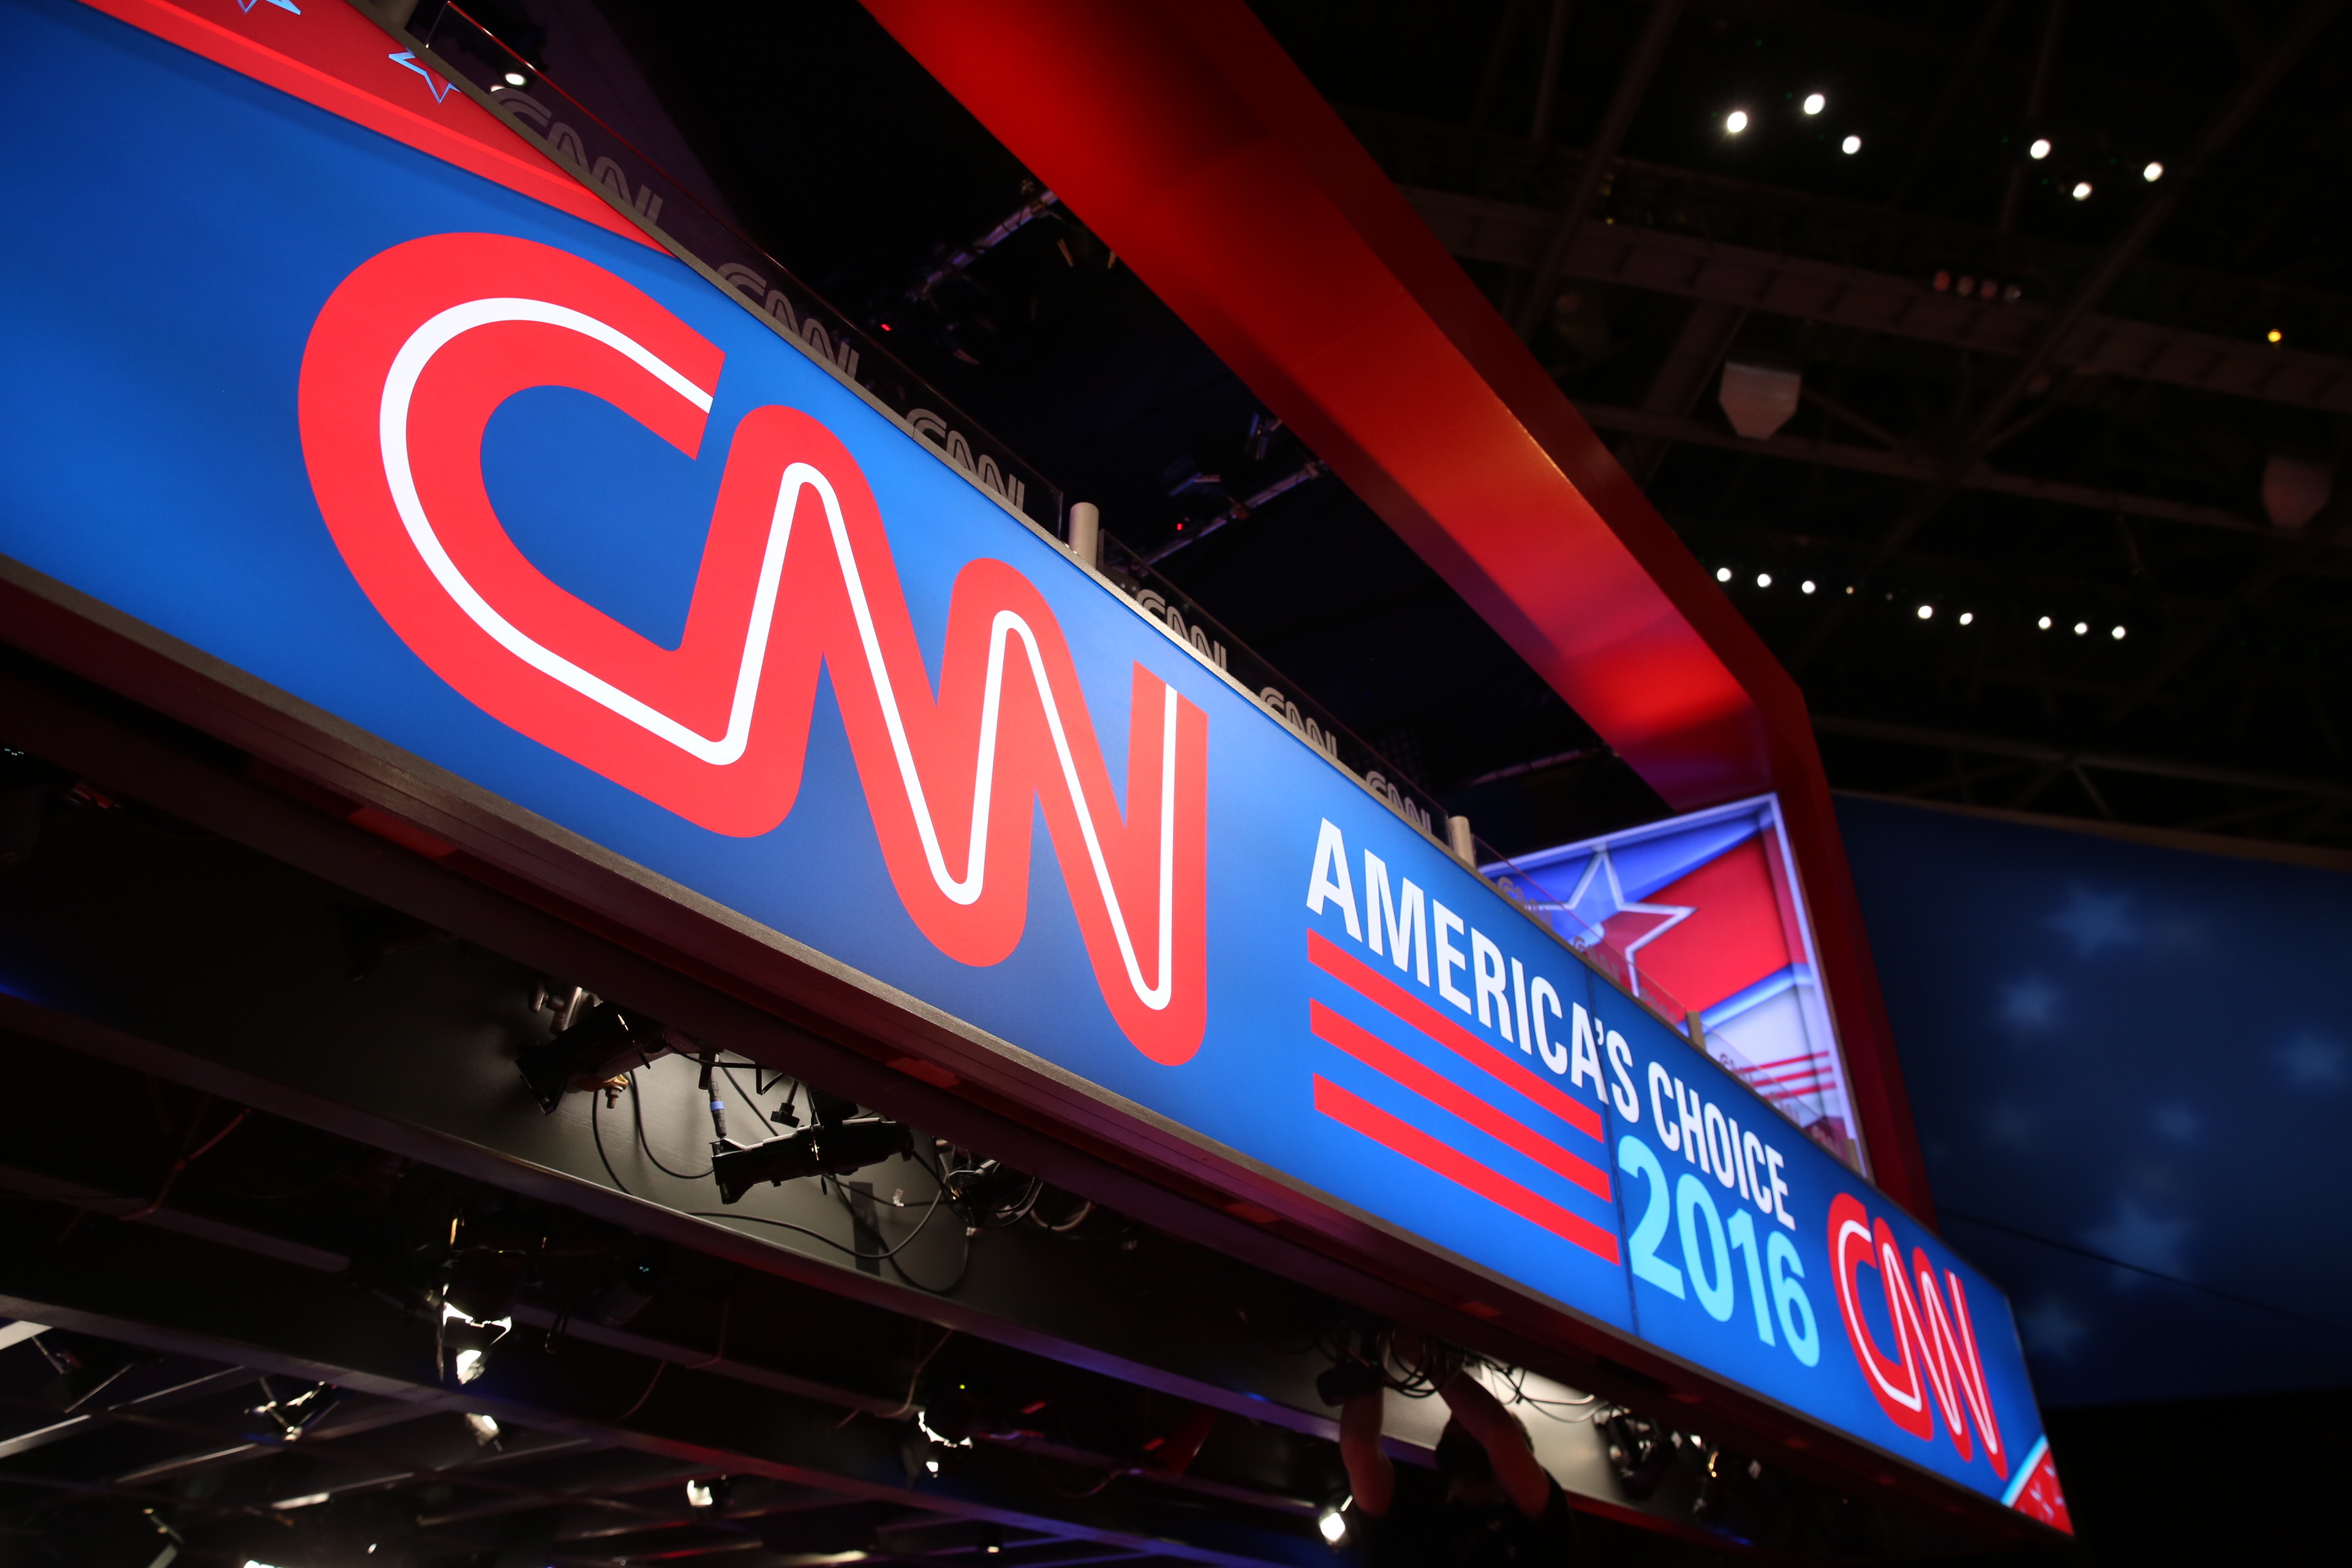 CNN Tops ABC News, CBS News and MSNBC during Second Night of the RNC